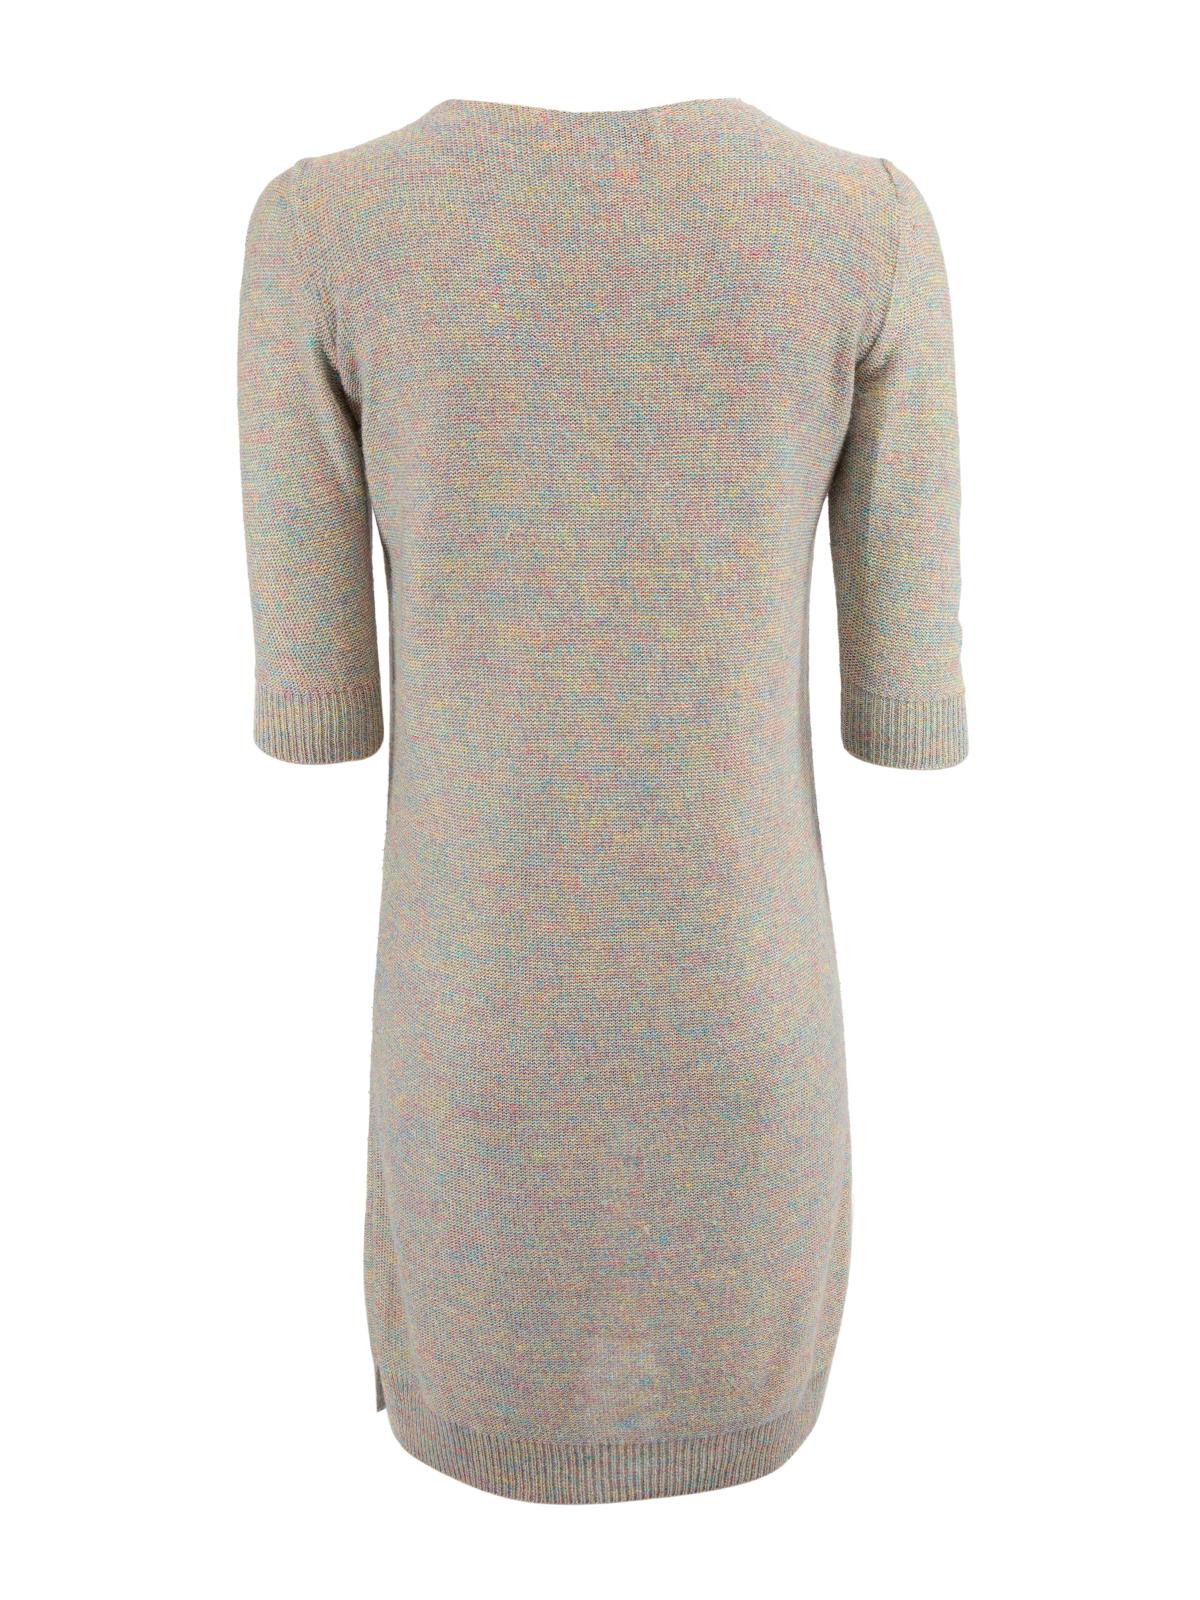 Pre-Loved Stella McCartney Women's Embroidered Knitted Mini Dress In Excellent Condition In London, GB